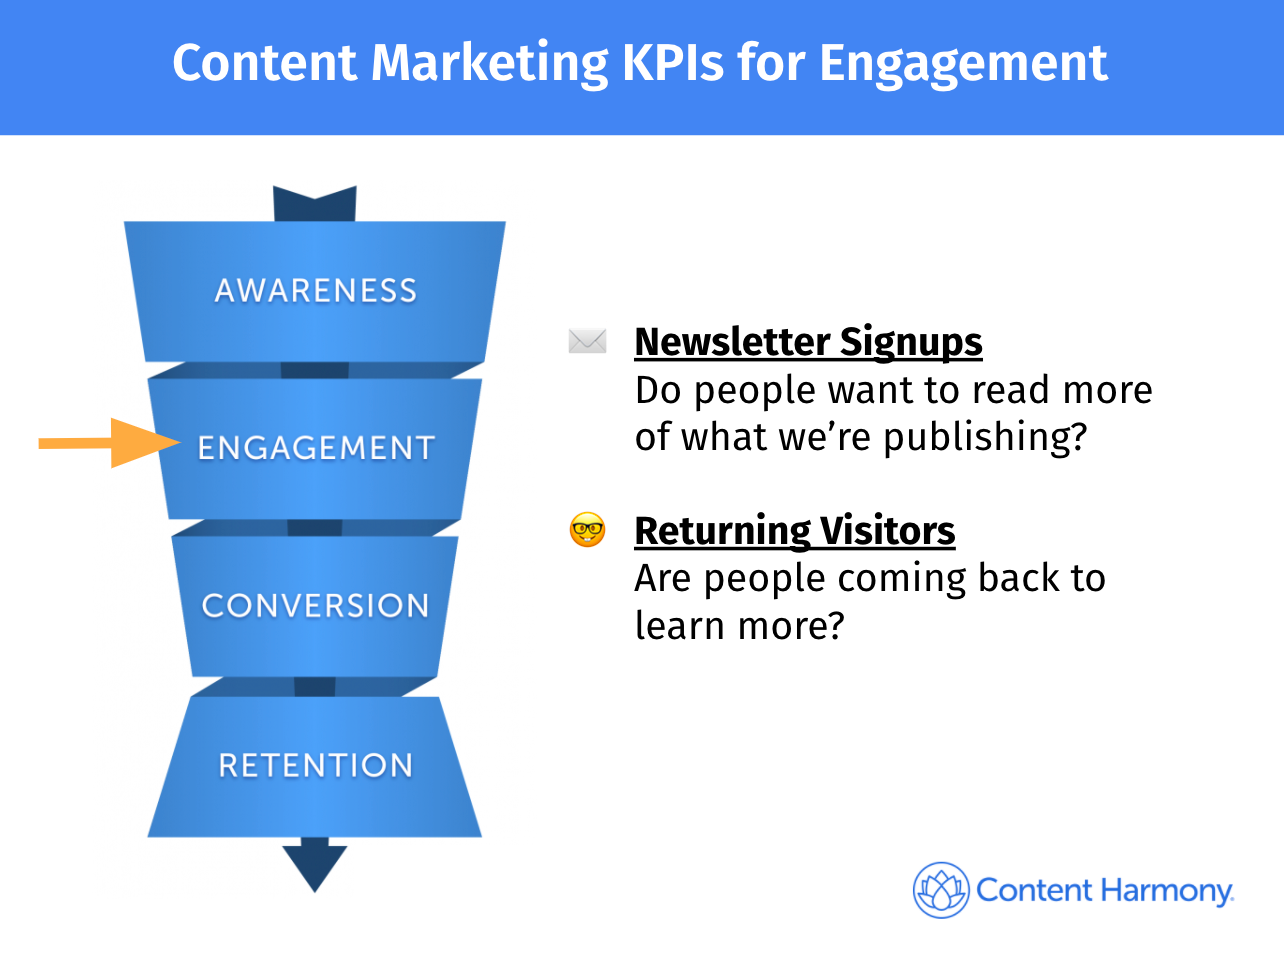 12 Content Marketing KPIs Worth Tracking (And 3 That Aren't)